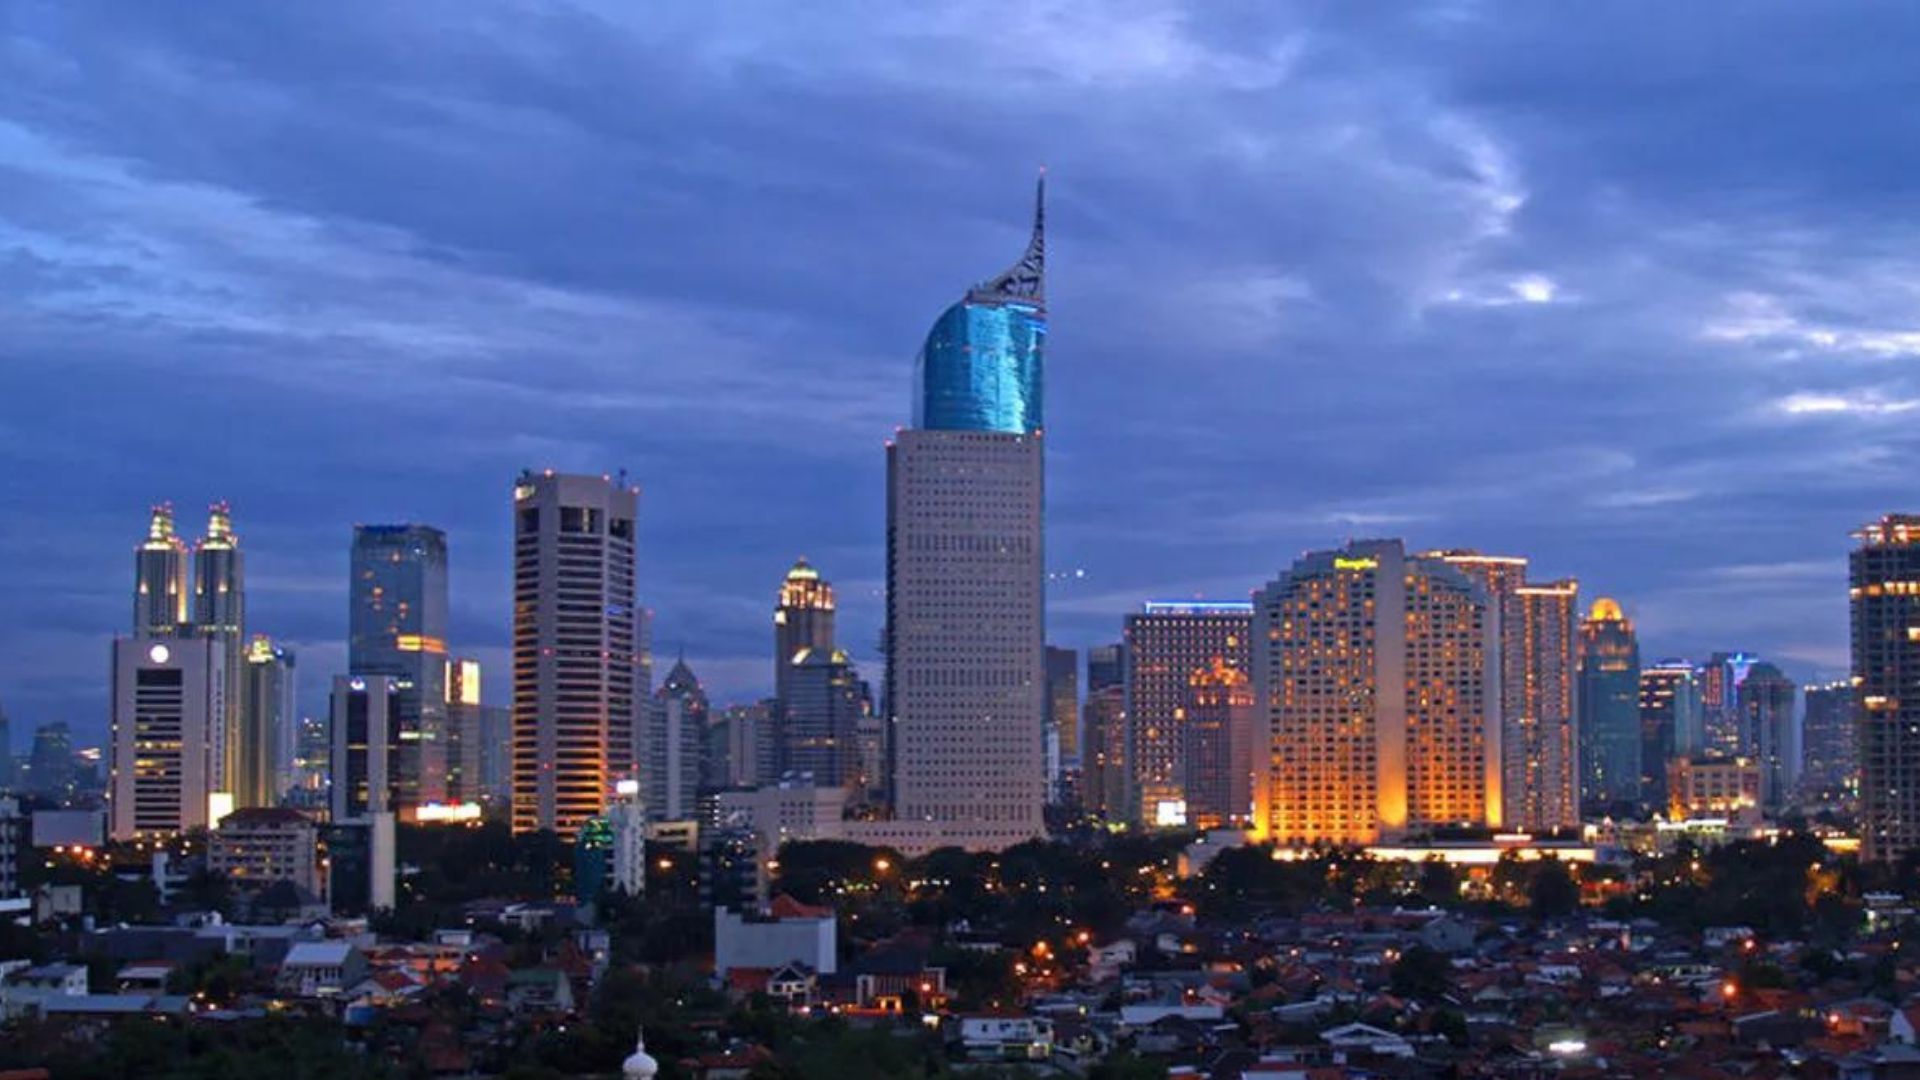 Jakarta Photos, Download The BEST Free Jakarta Stock Photos & HD Images